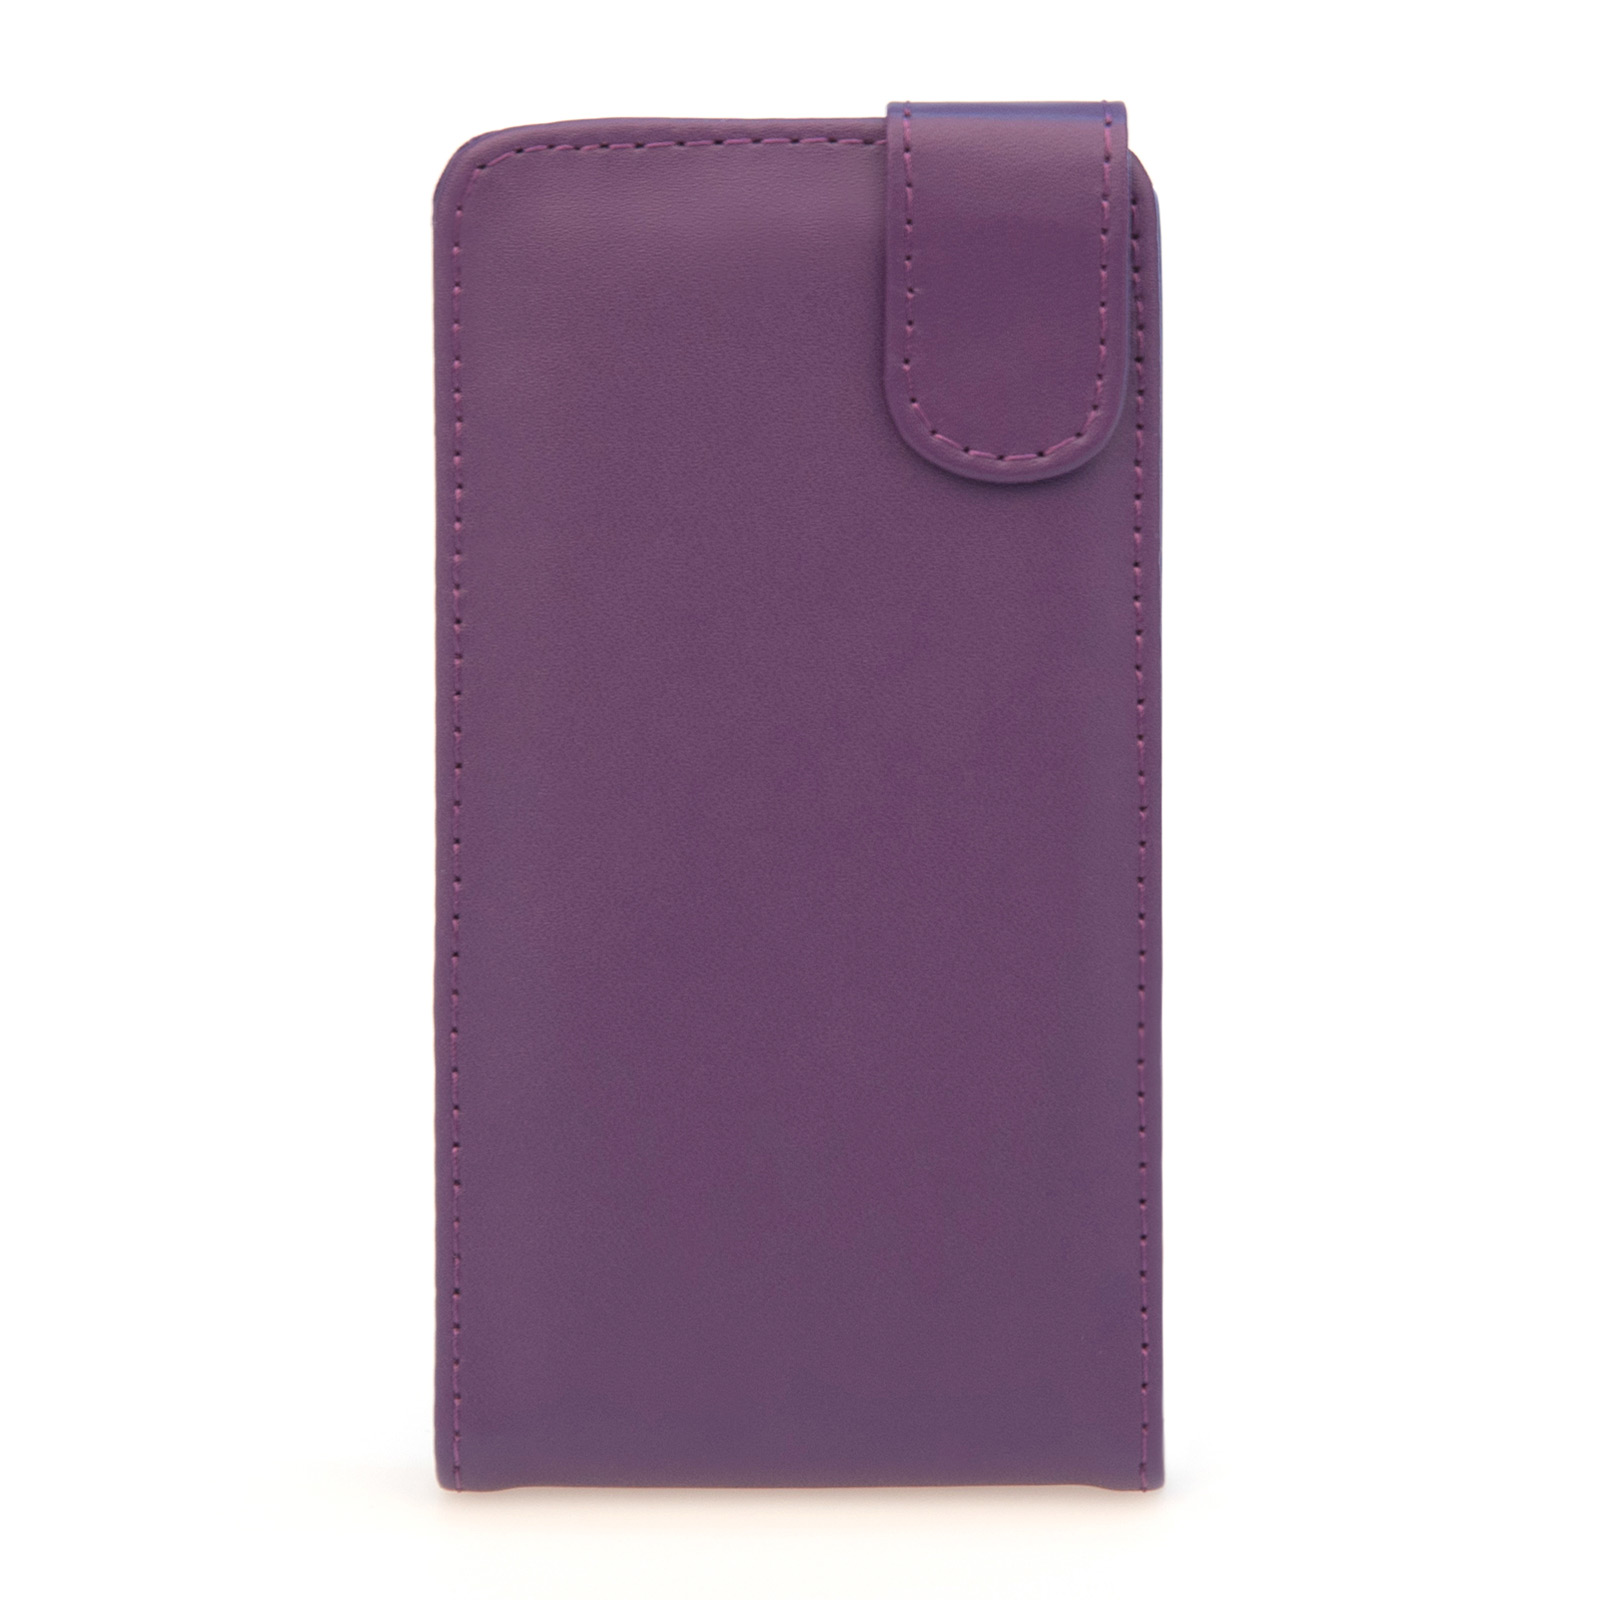 YouSave Accessories Huawei Ascend P7 Leather-Effect Flip Case - Purple